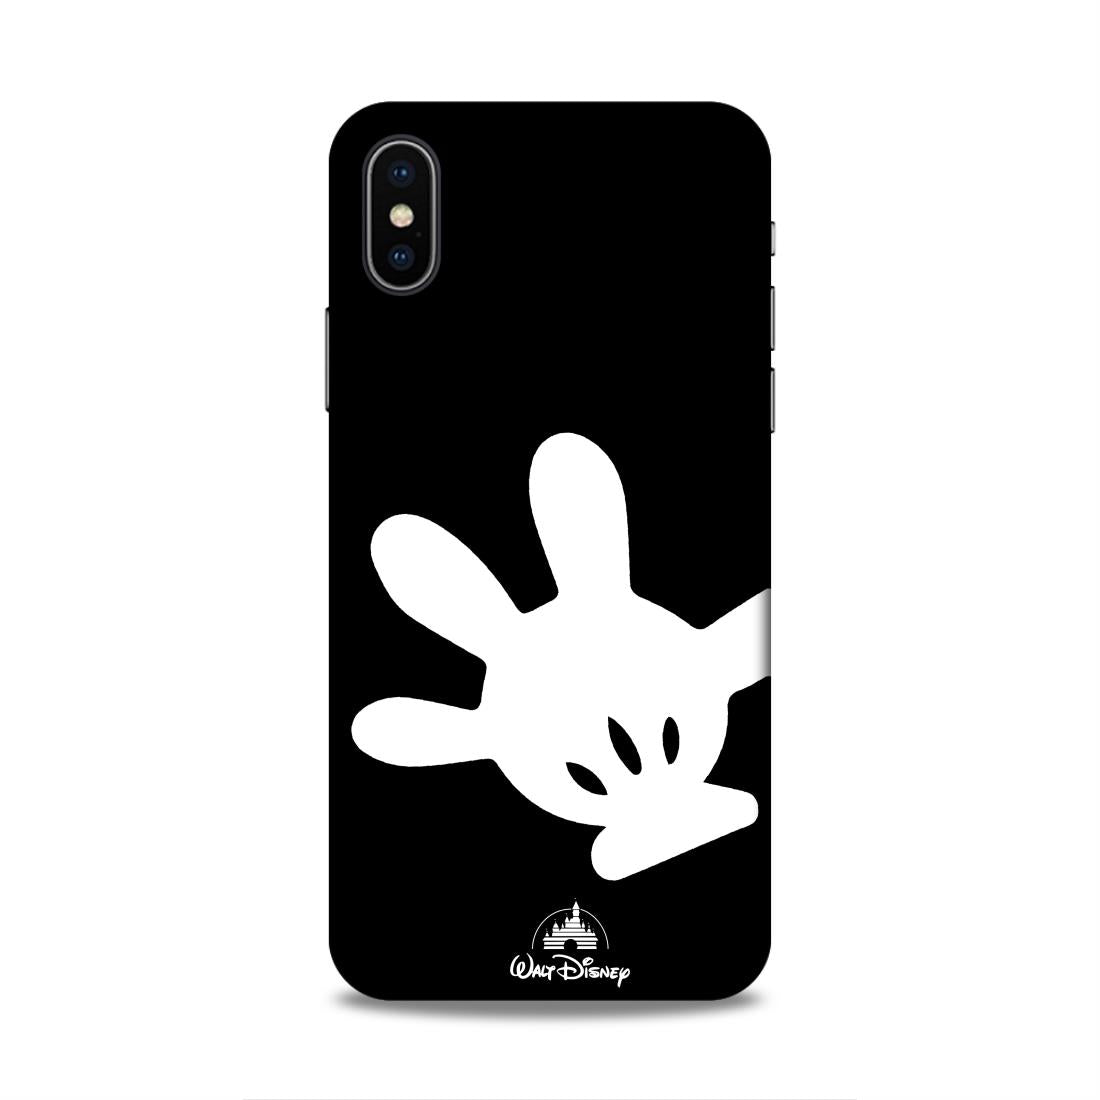 Micky Hand Hard Back Case For Apple iPhone X/XS